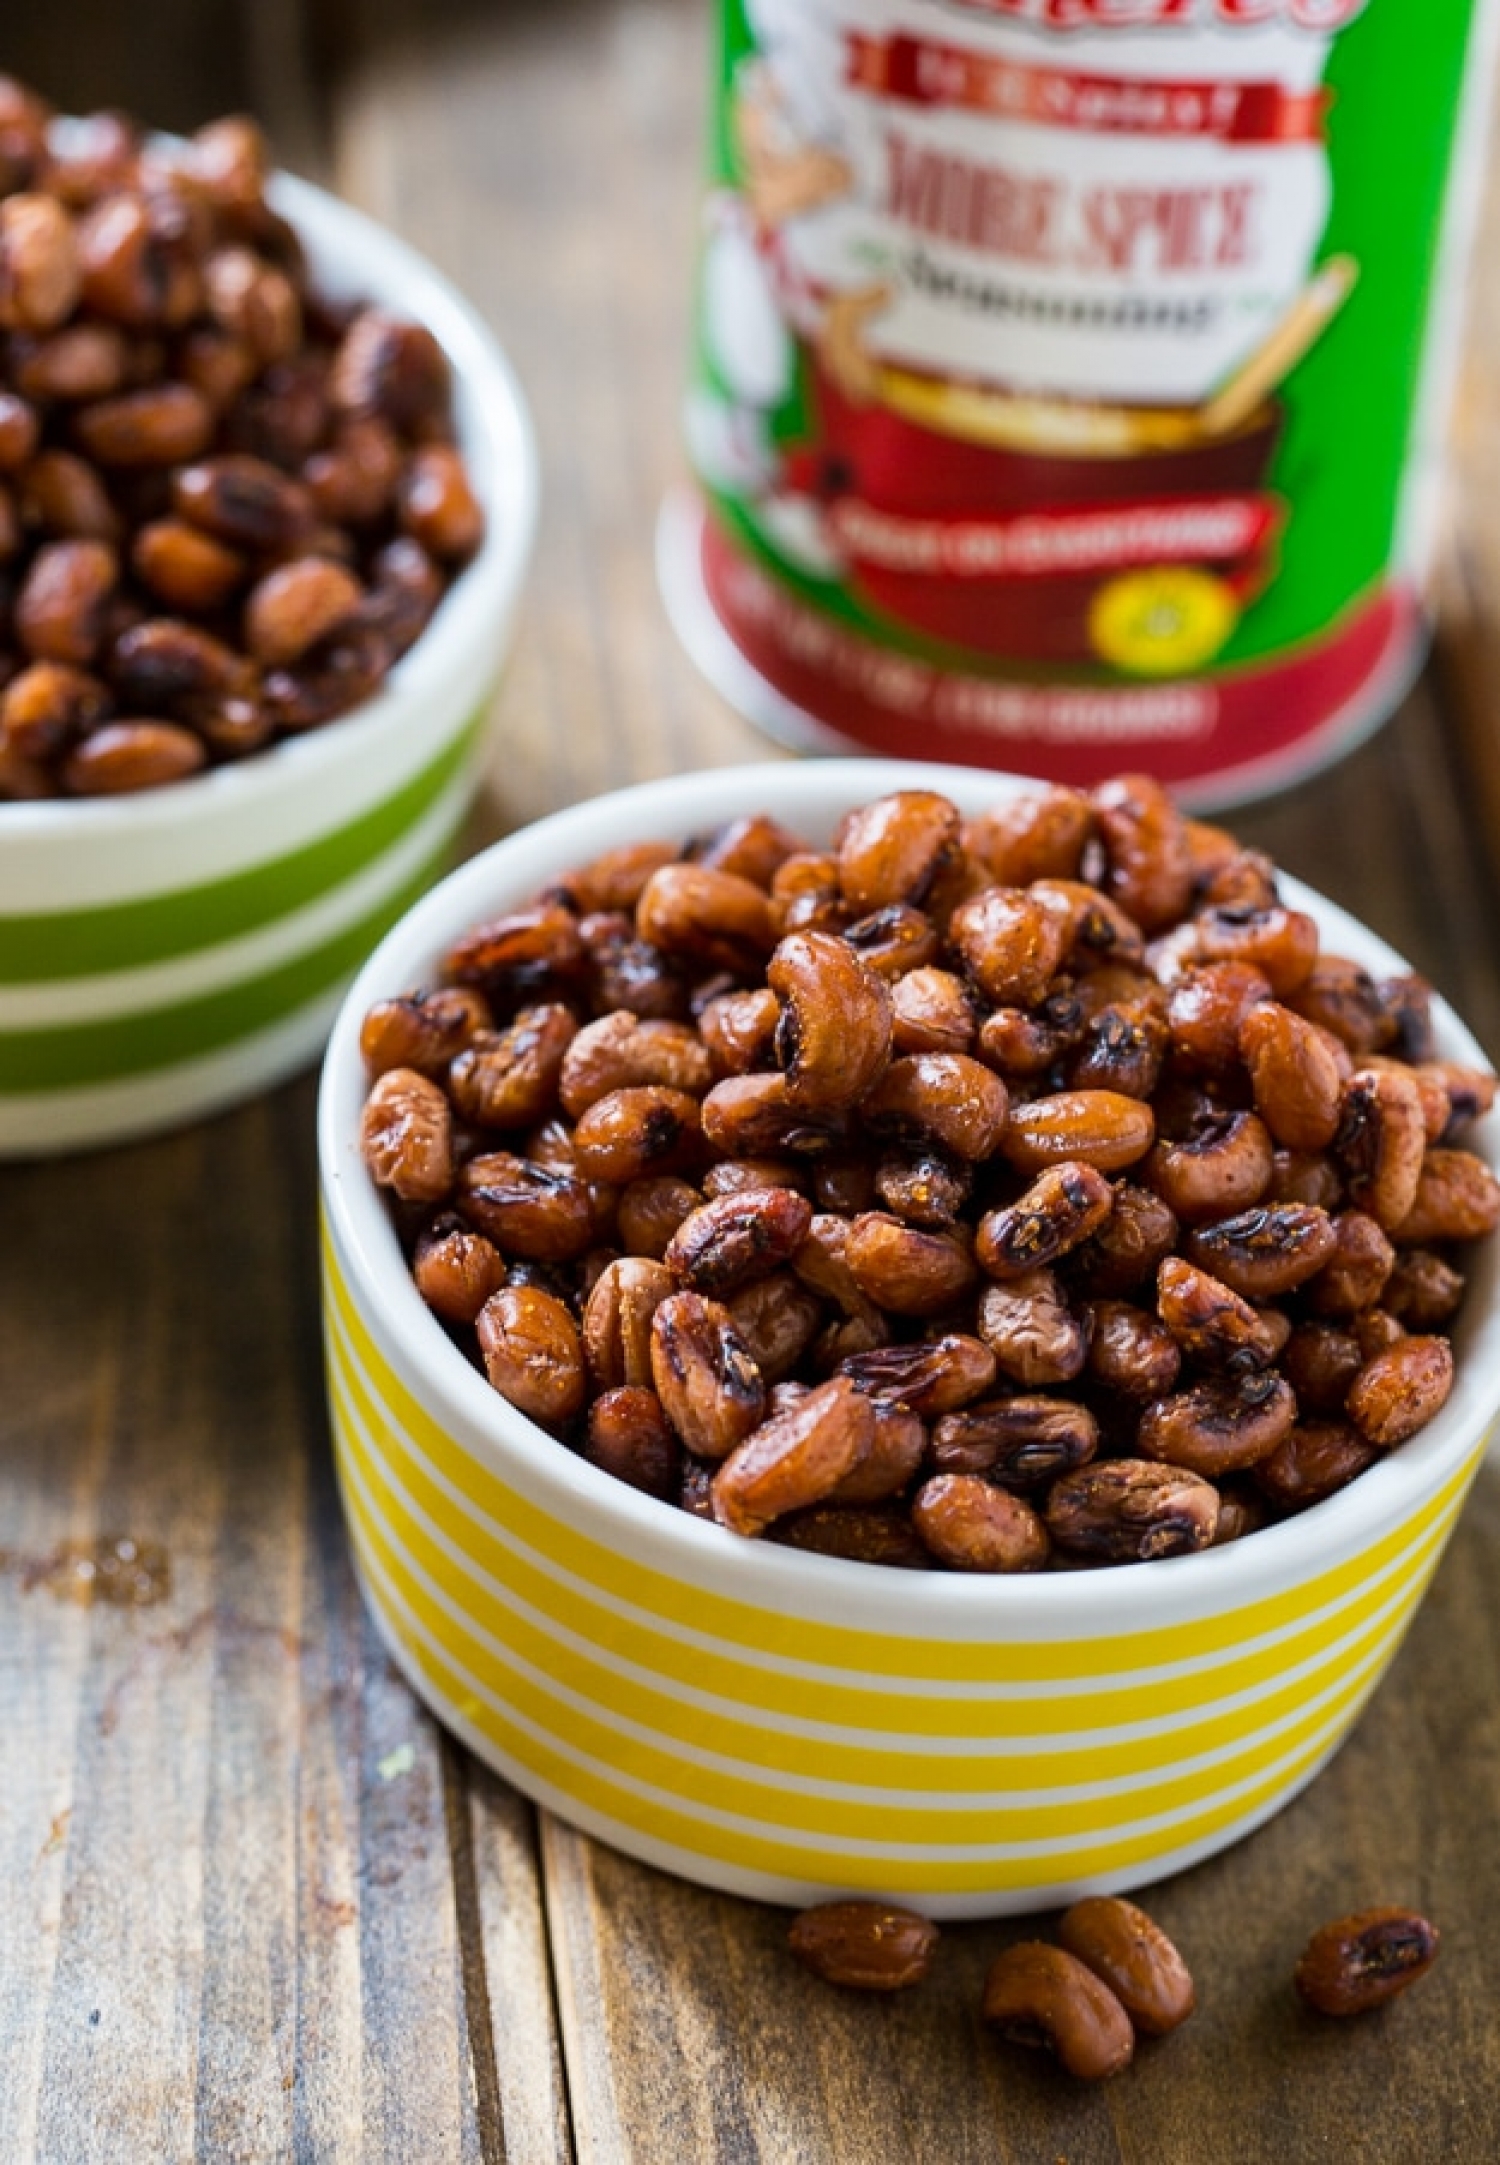 <p>These roasted black-eyed peas are a perfect snack to reach for when you're craving something crunchy, salty, and just a bit spicy. Roast a big batch, and munch on them all afternoon for a guilt-free, protein-packed snack! <a href="https://spicysouthernkitchen.com/roasted-black-eyed-peas/" rel="noopener">Get the recipe here.</a></p>